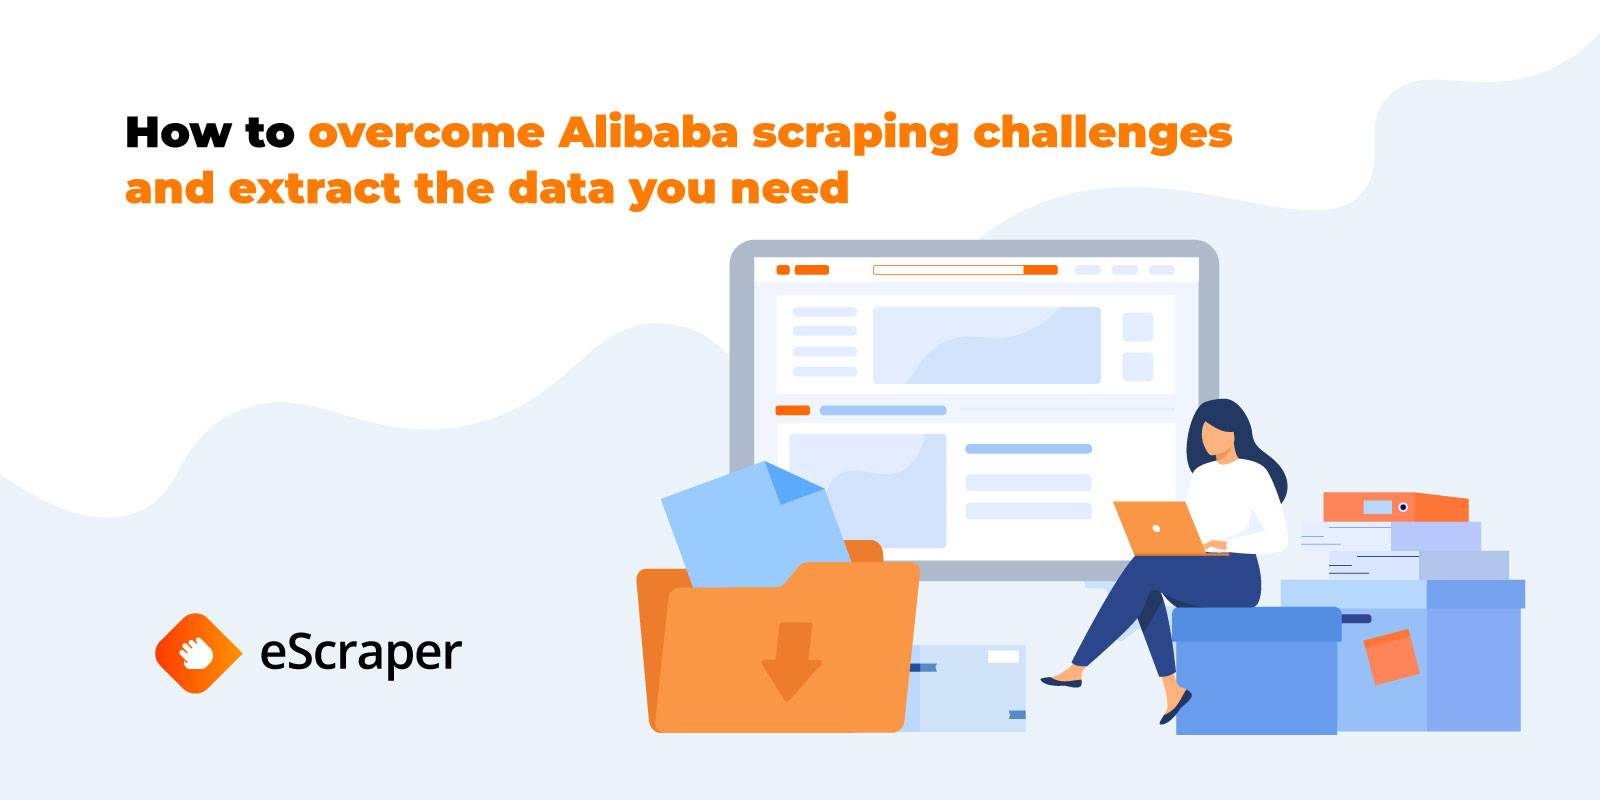 Overcome Alibaba scraping challenges and extract required data